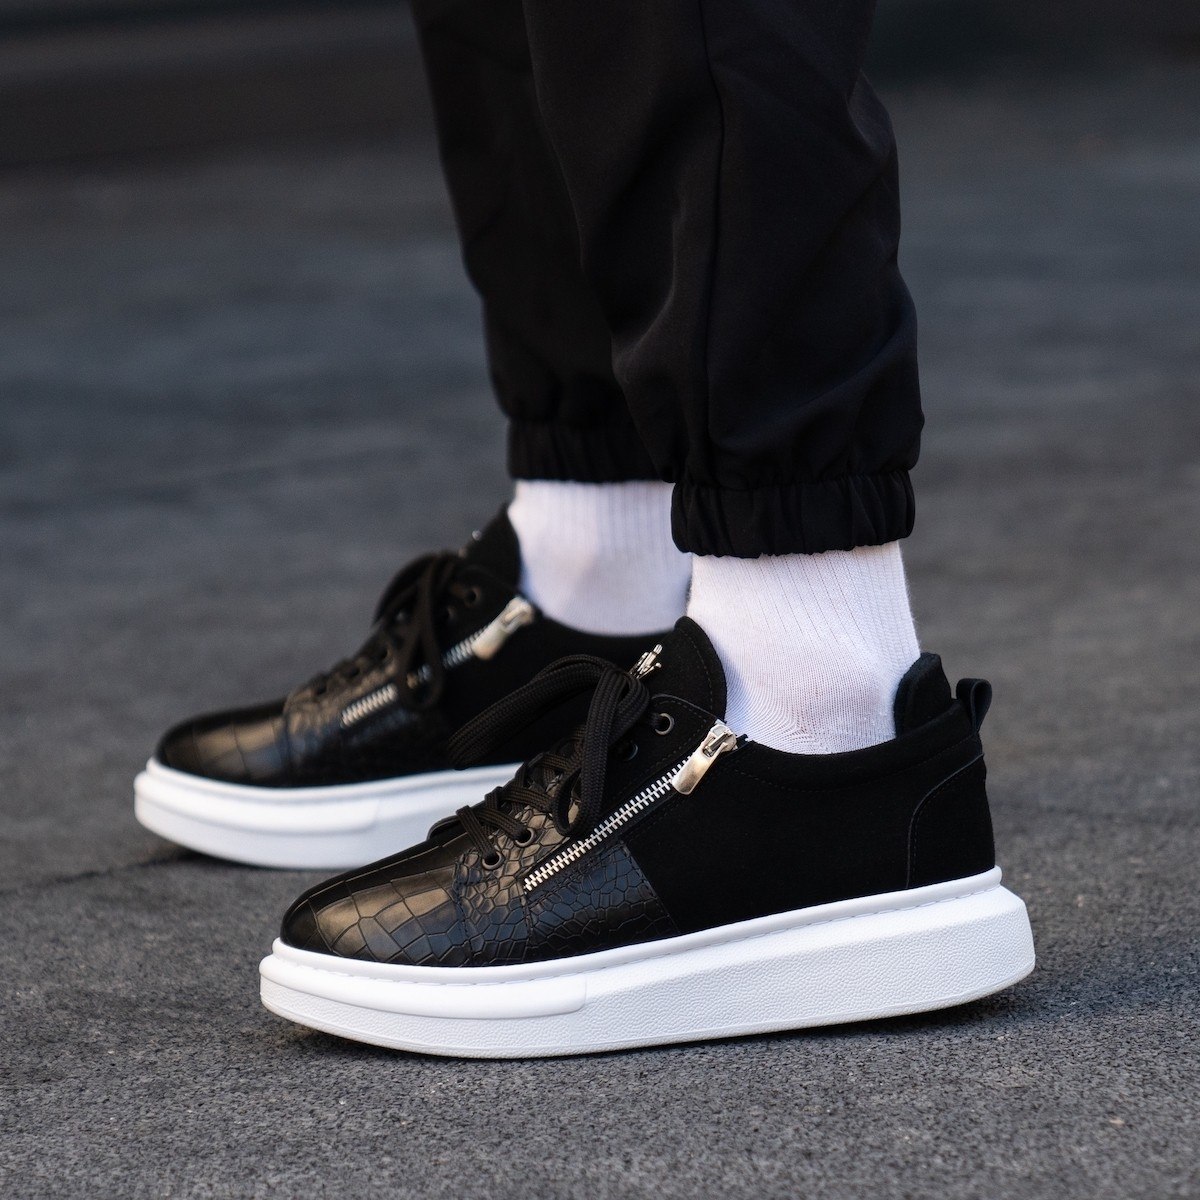 Hype Sole Zipped Style Sneakers in Black Suede Crocco Design | Martin Valen